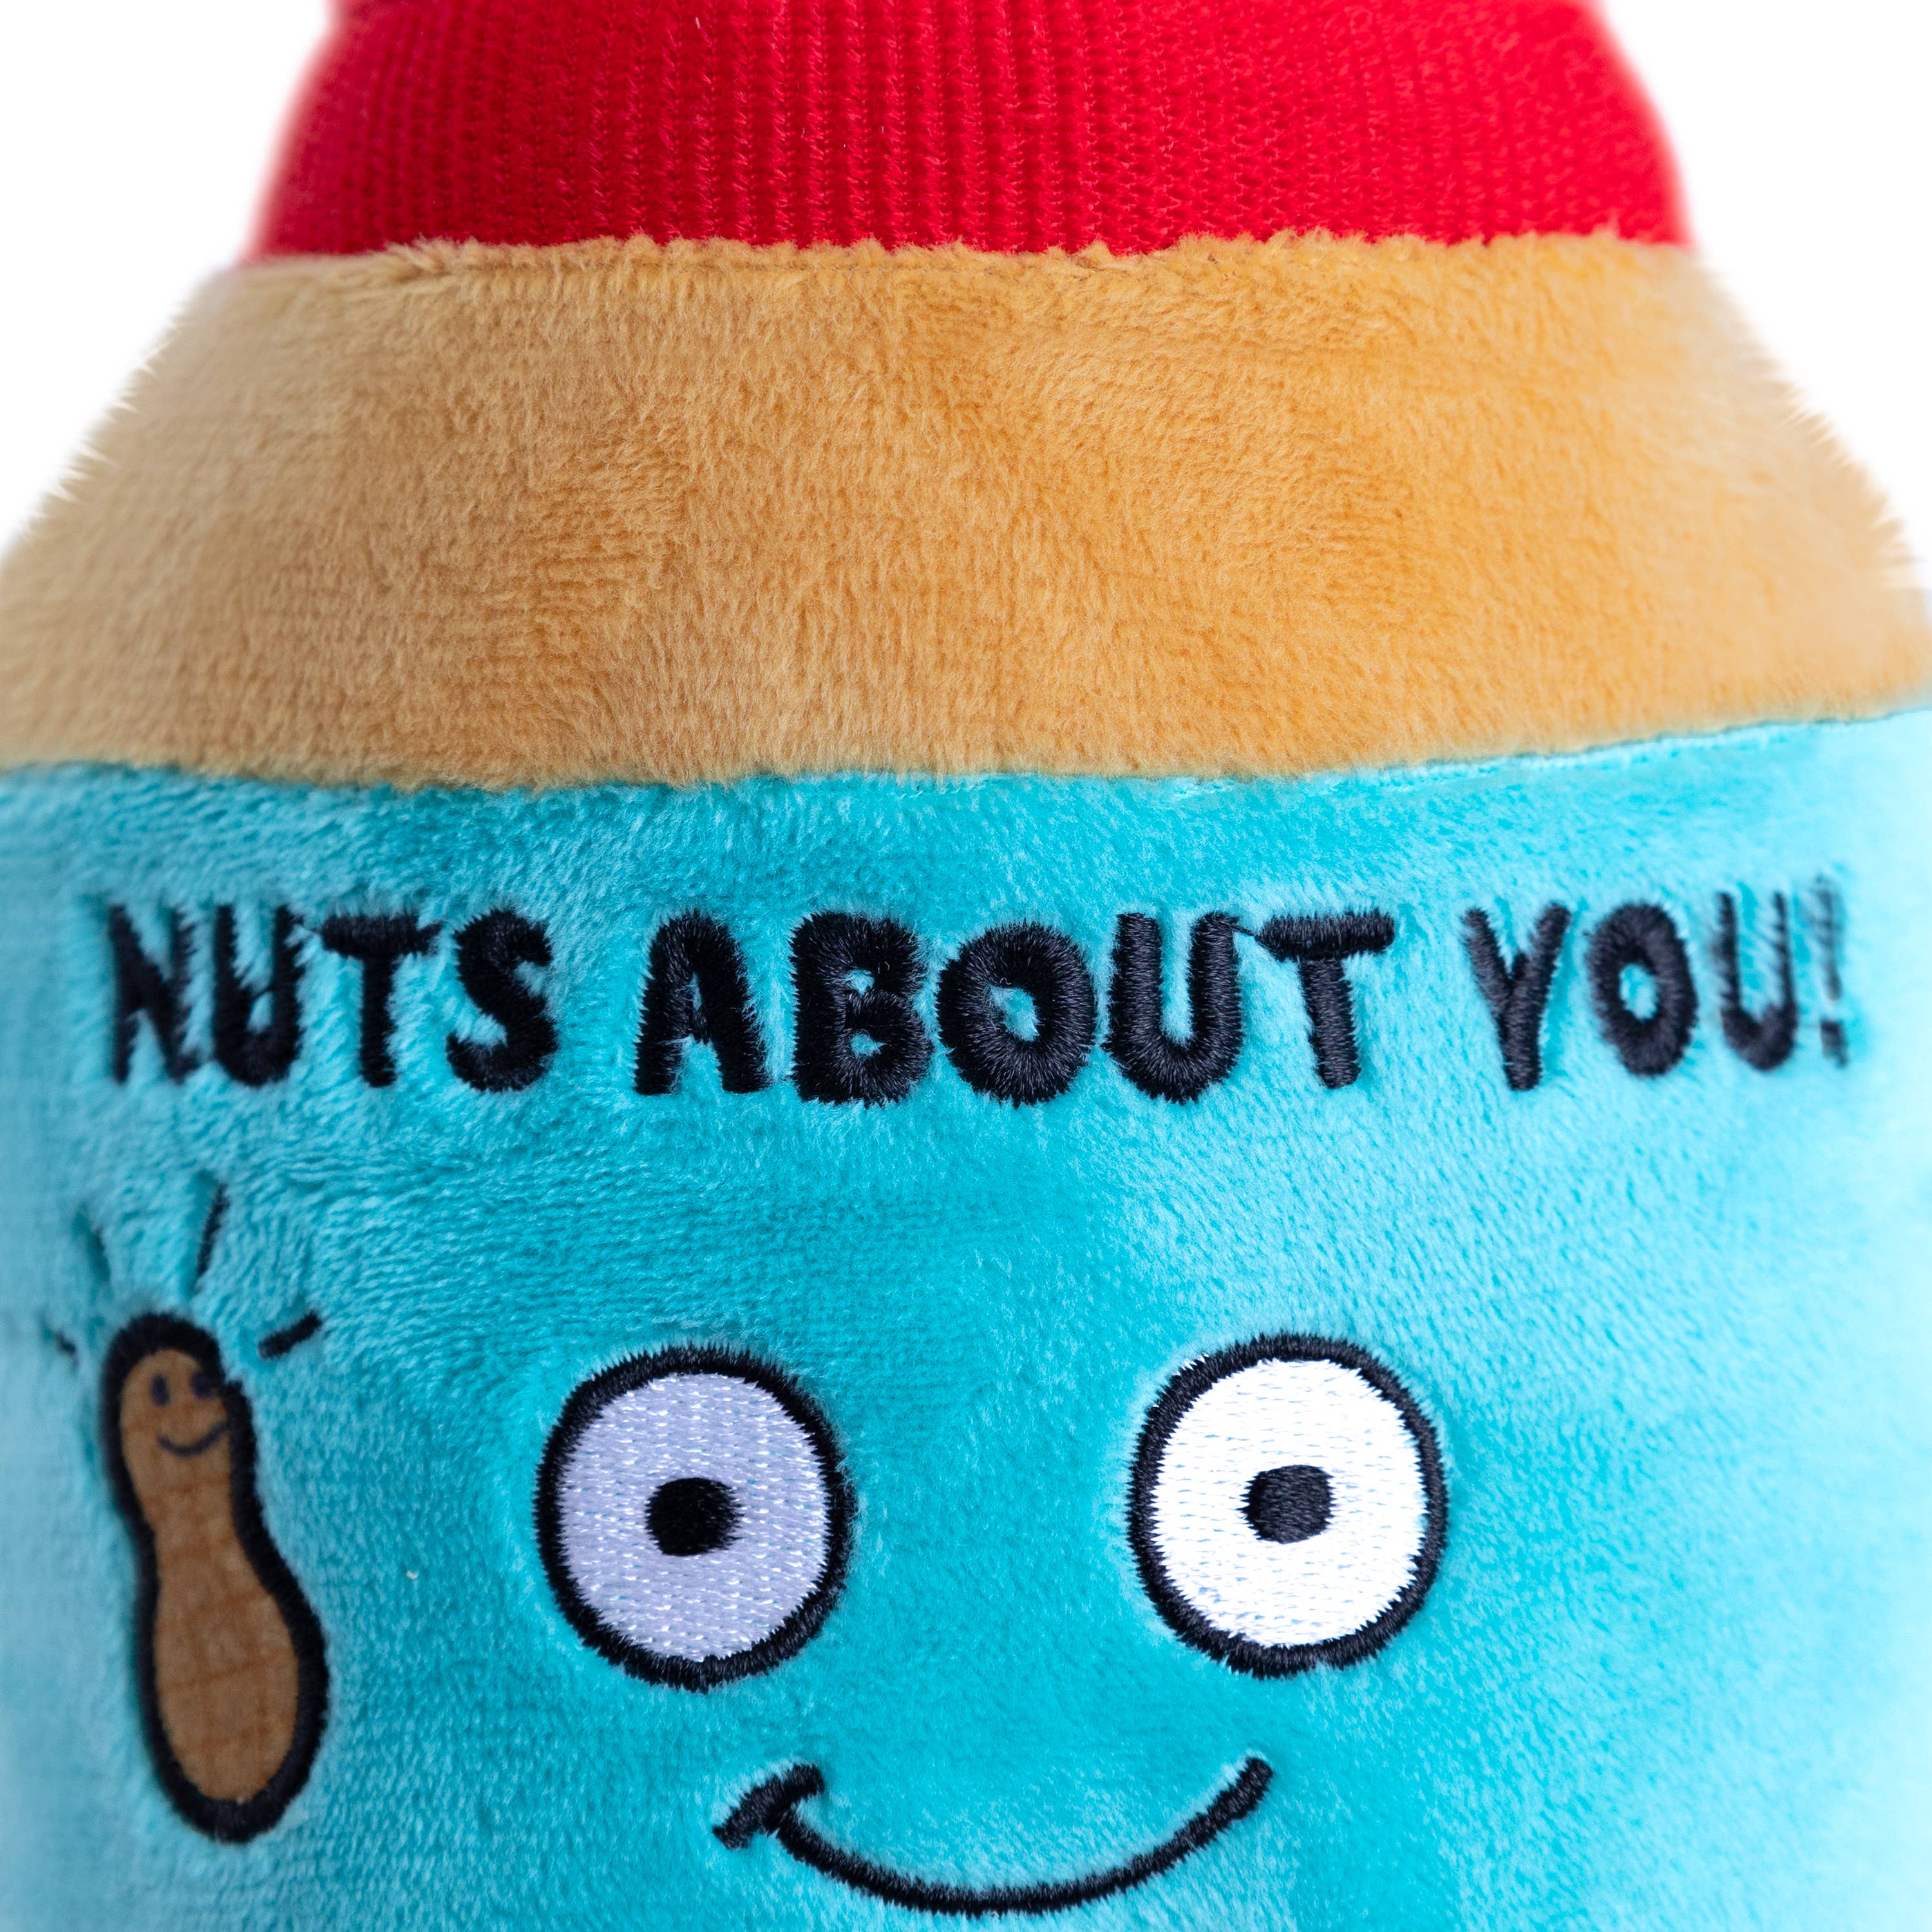 Punchkins "Nuts About You" Plush Jar of Peanut Butter Kawaii Gifts